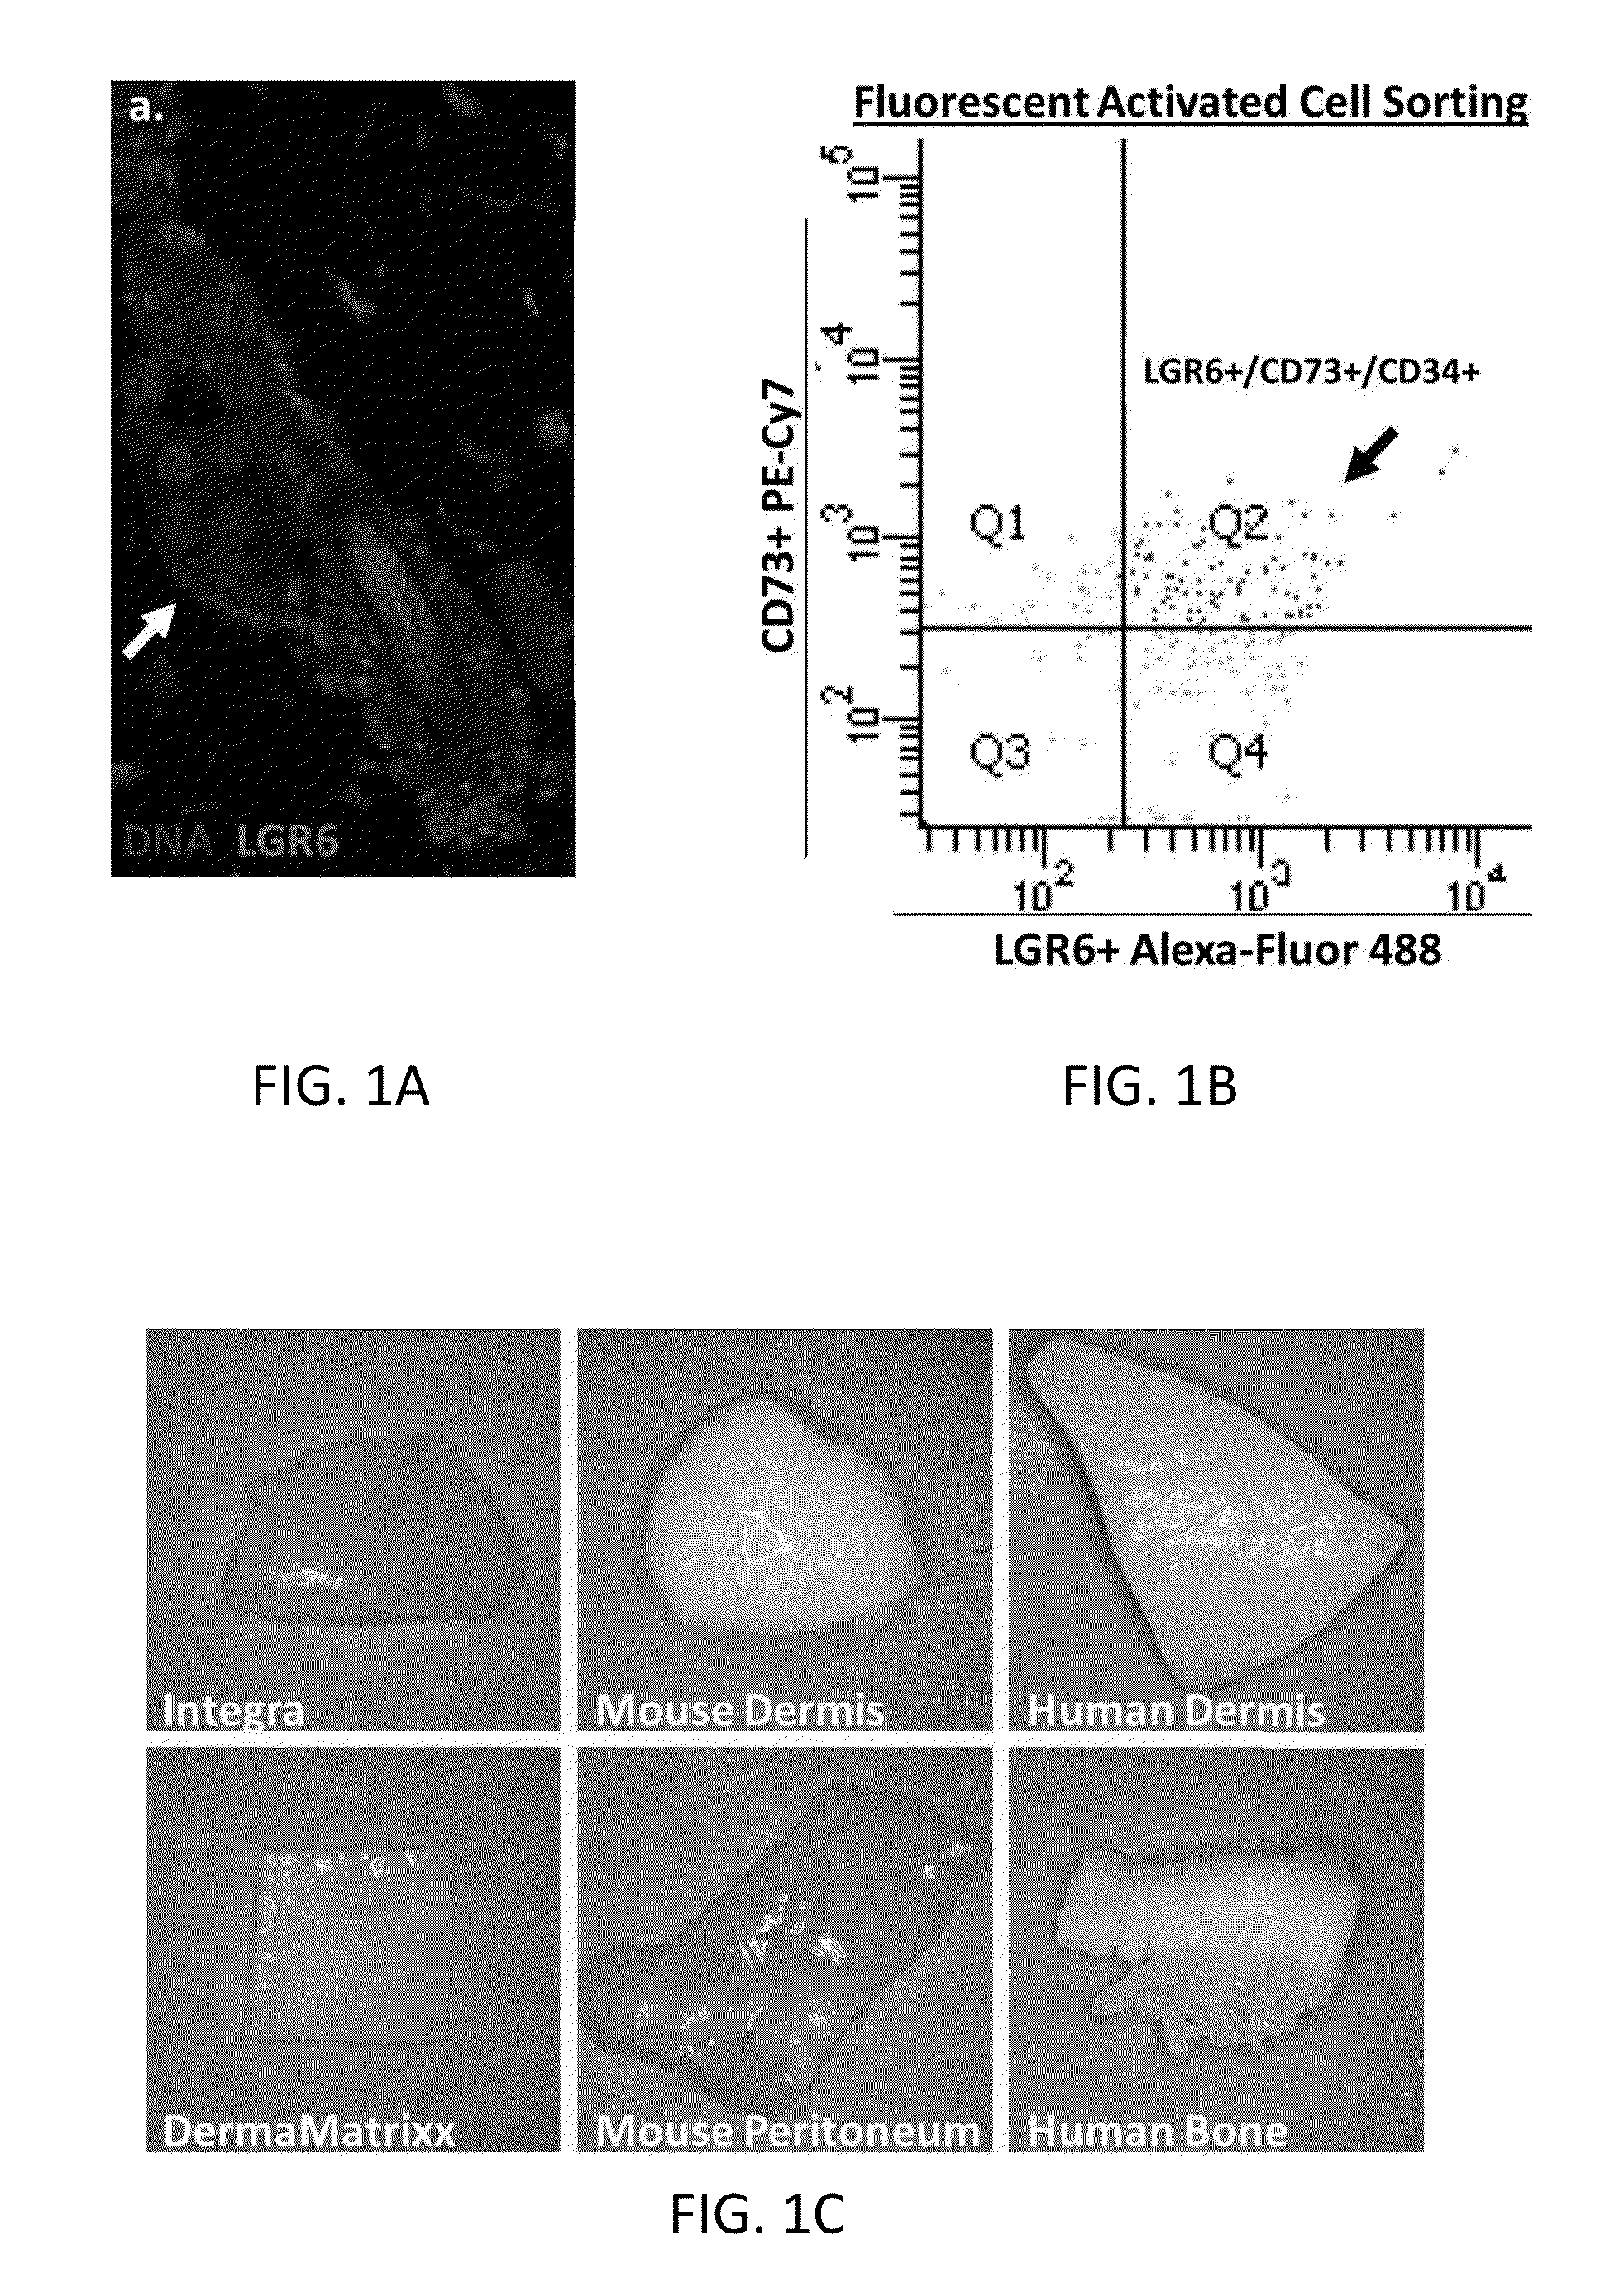 Methods for Development and Use of Minimally Polarized Function Cell Micro-Aggregate Units in Tissue Applications Using LGR4, LGR5 and LGR6 Expressing Epithelial Stem Cells